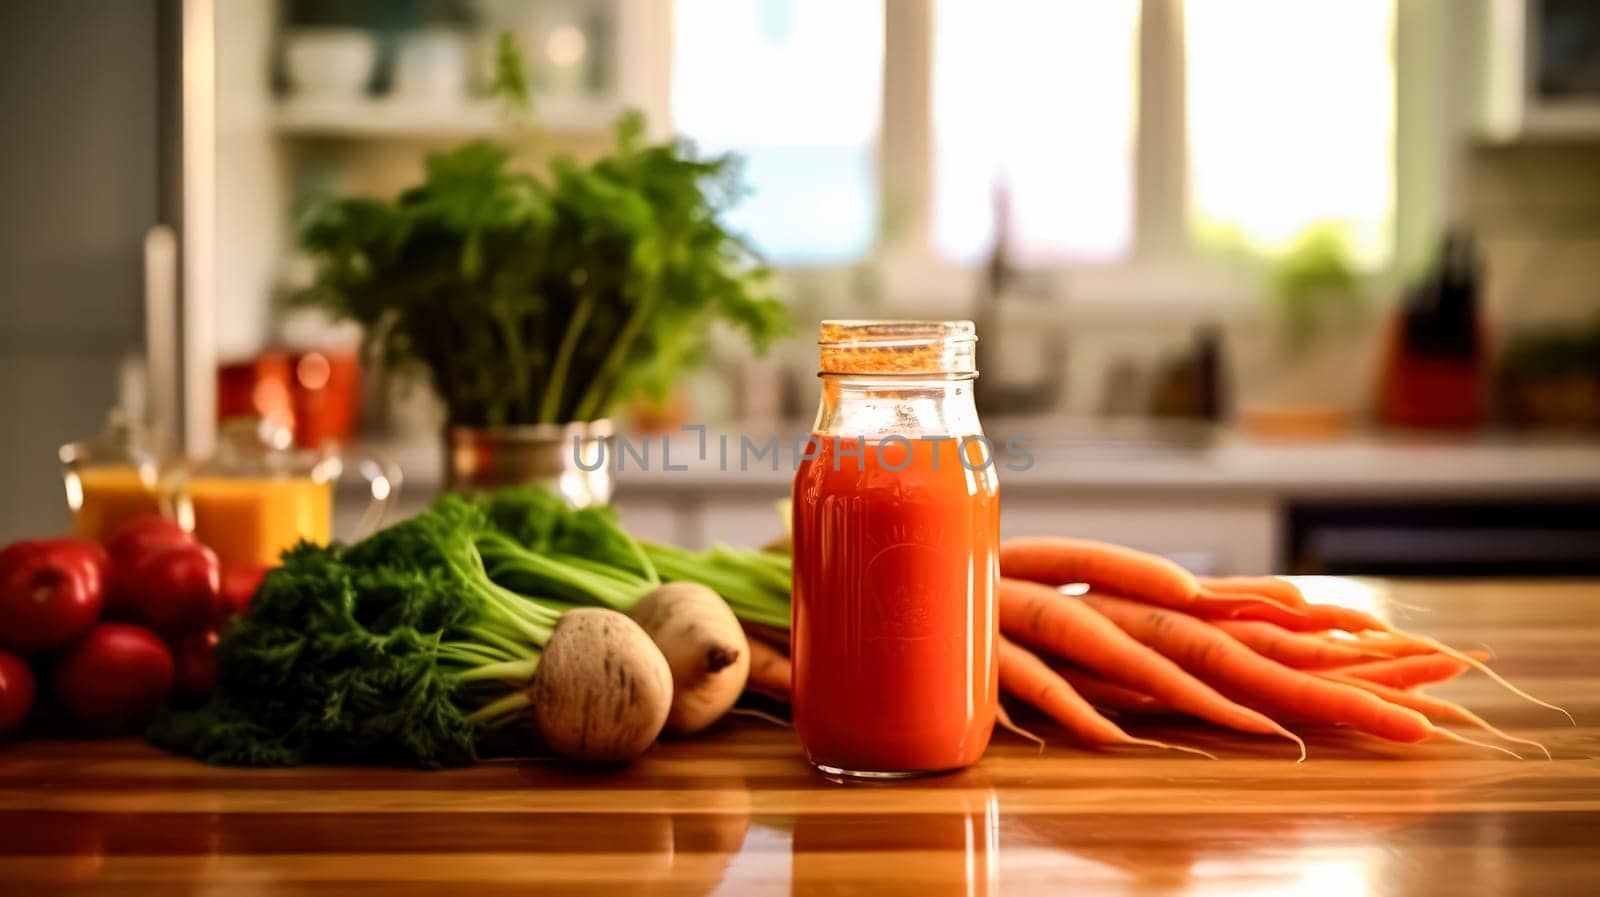 A glass jar of carrot juice sits on a wooden table next to a variety of vegetables, including carrots, celery, and beets. Concept of health and wellness, as the fresh produce